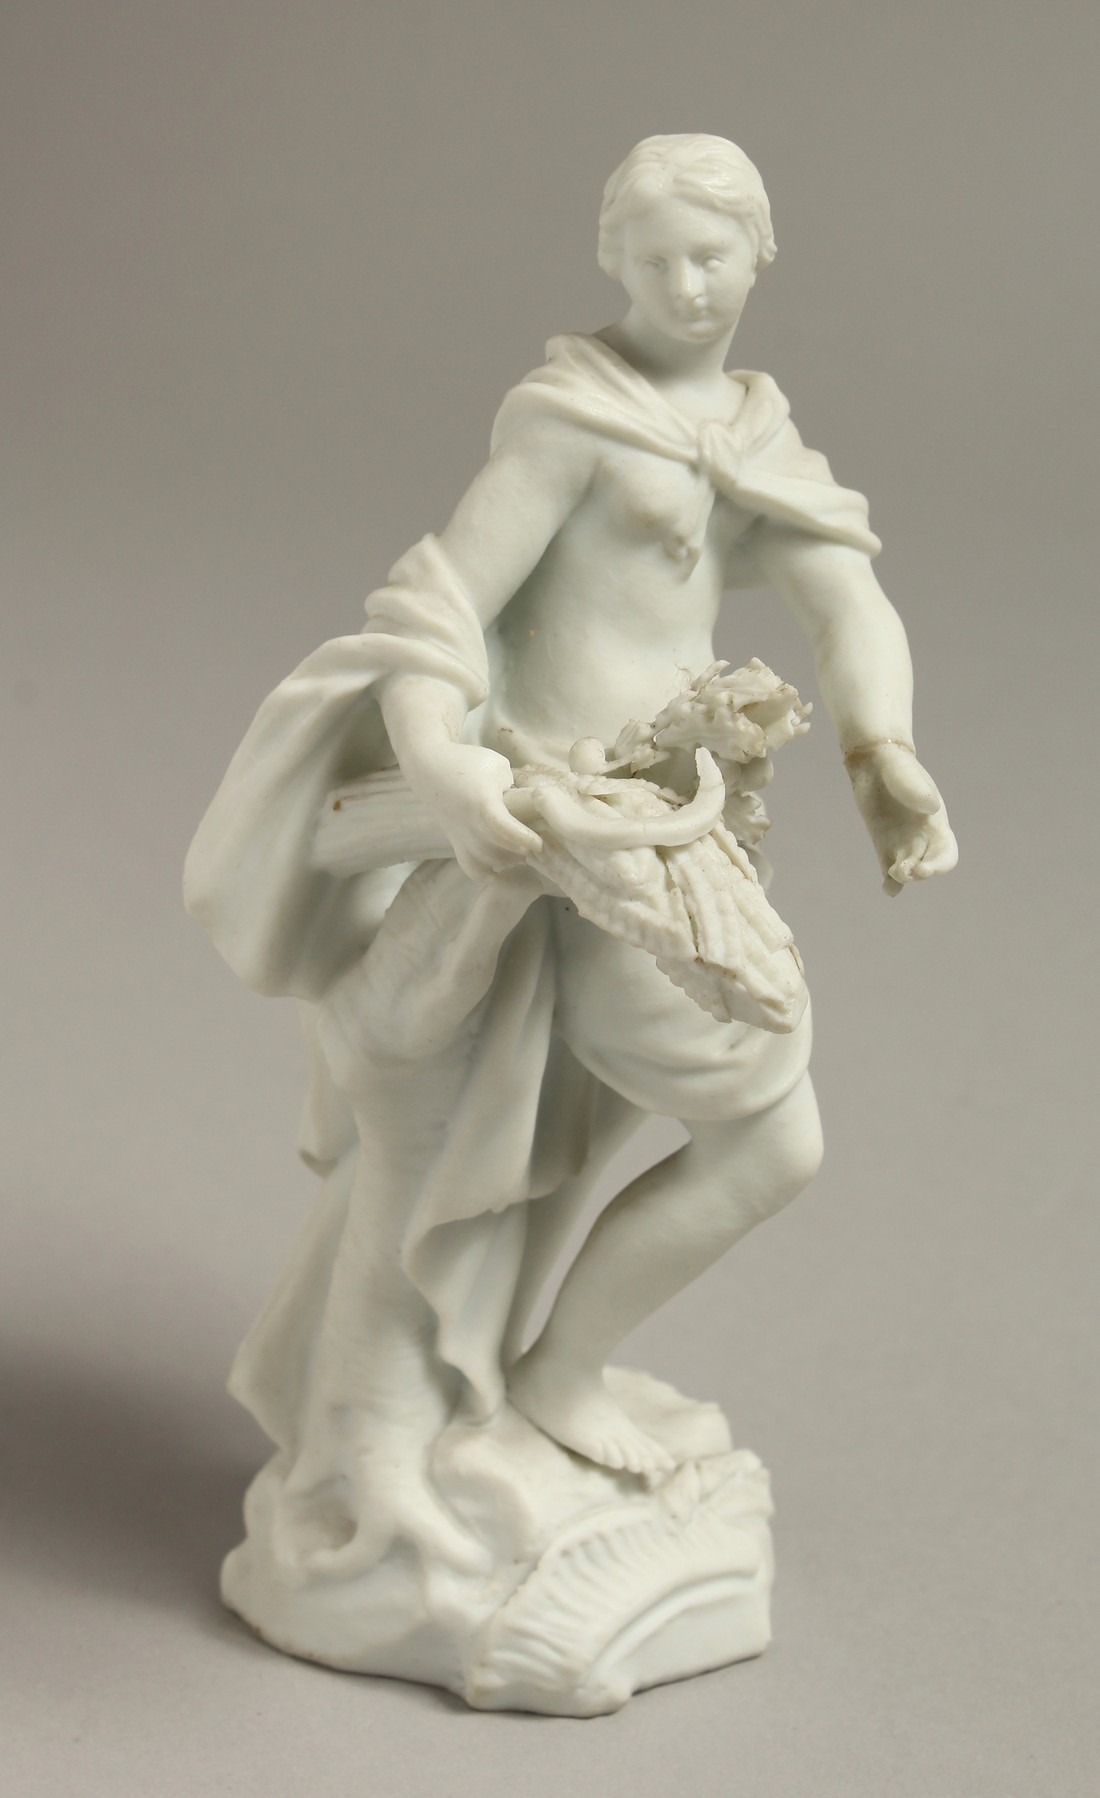 A LATE 18TH CENTRUY / EARLY 19TH CENTURY MEISSEN BISCUIT FIGURE of a girl with a scythe and a bundle